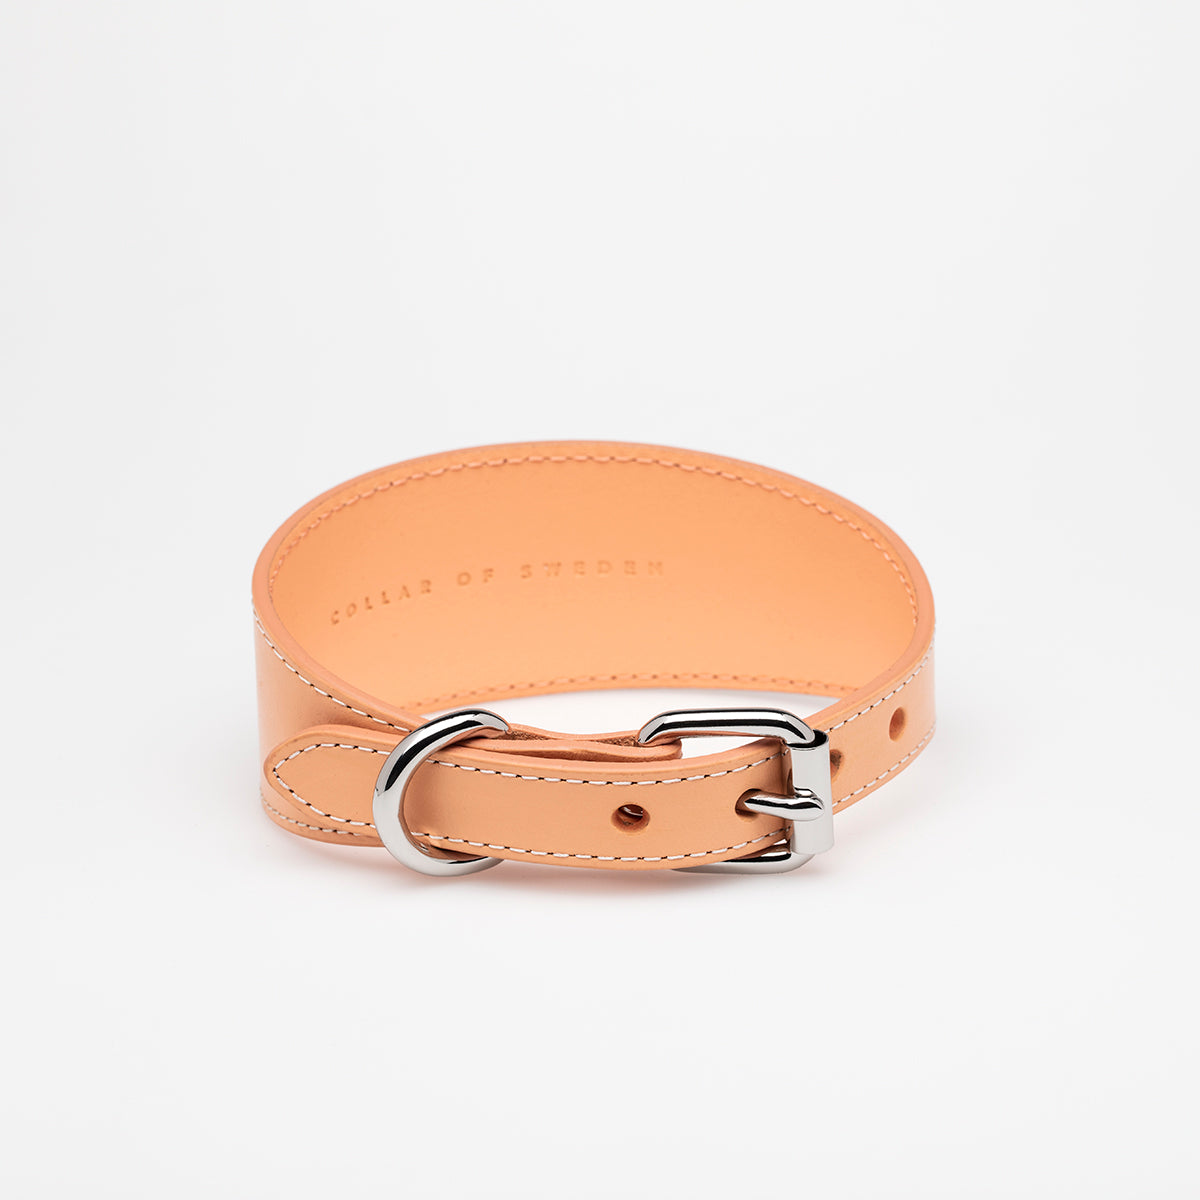 image - Apricot Leather Collar XL Wide